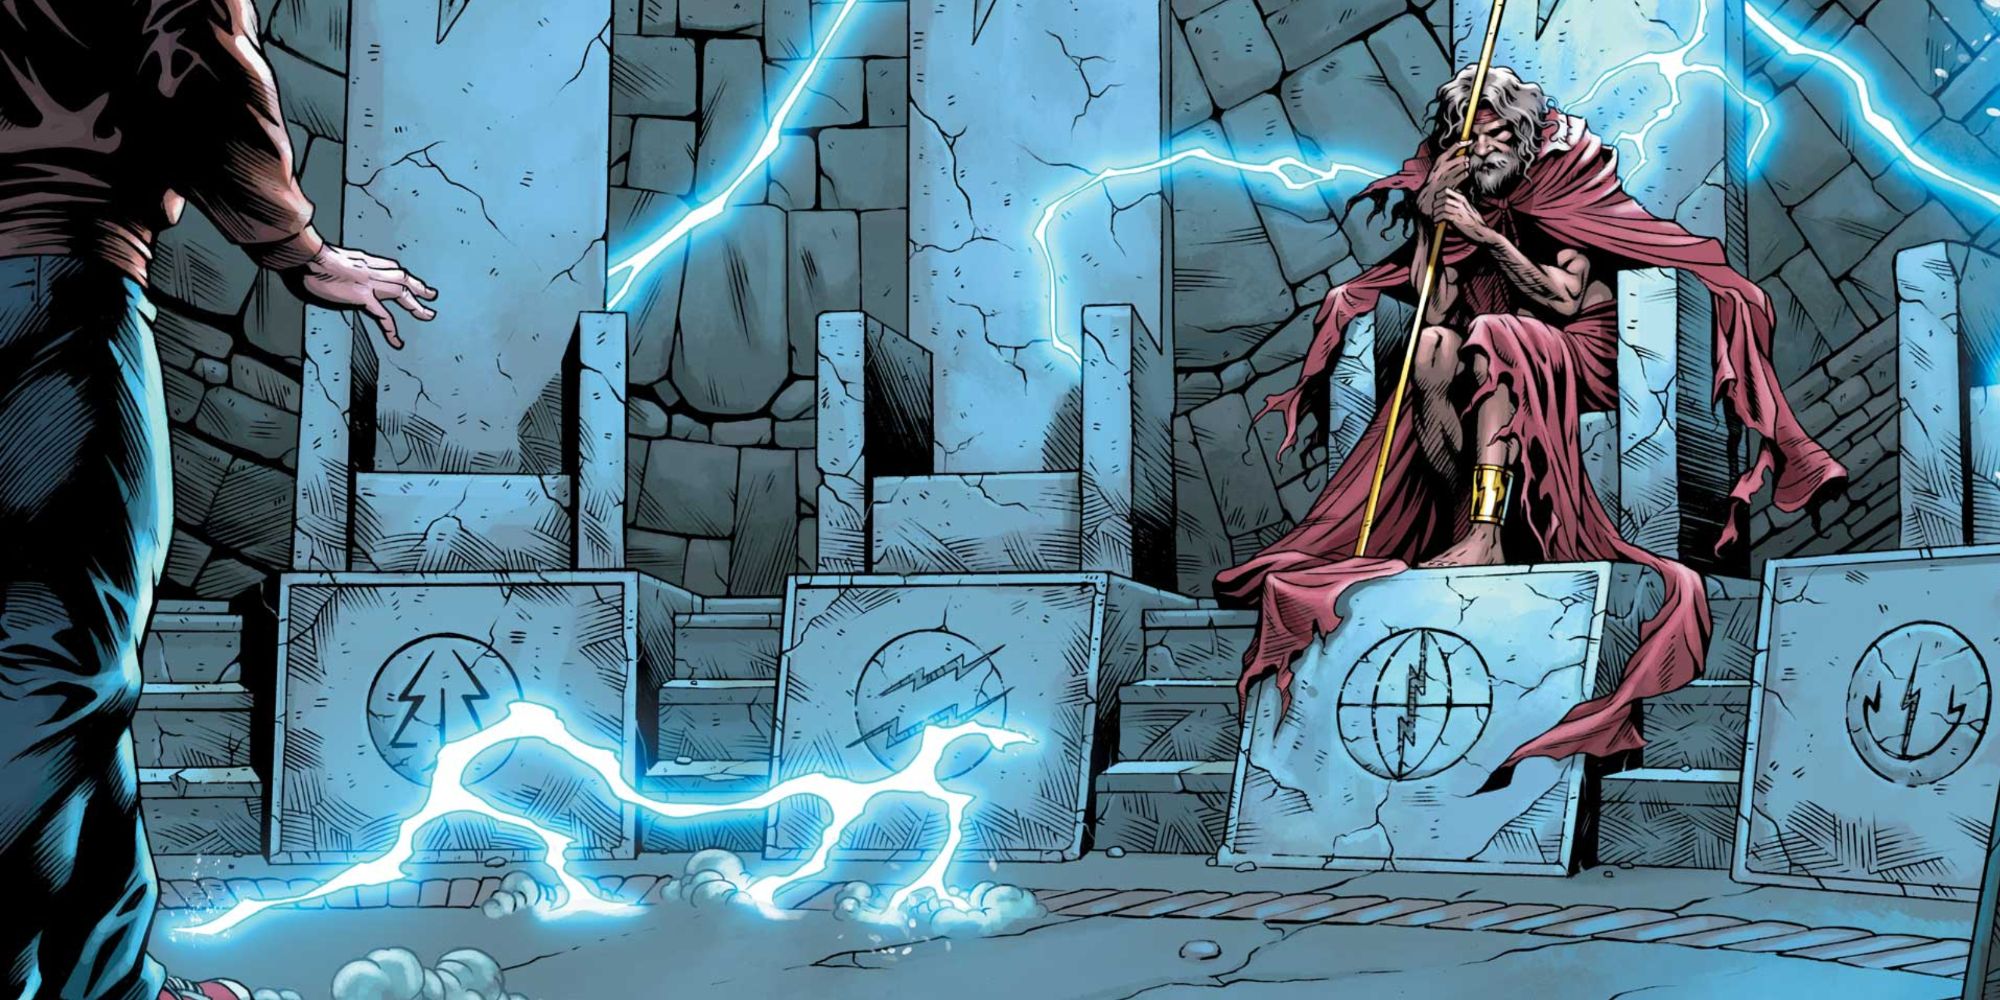 The wizard Shazam sits on a throne